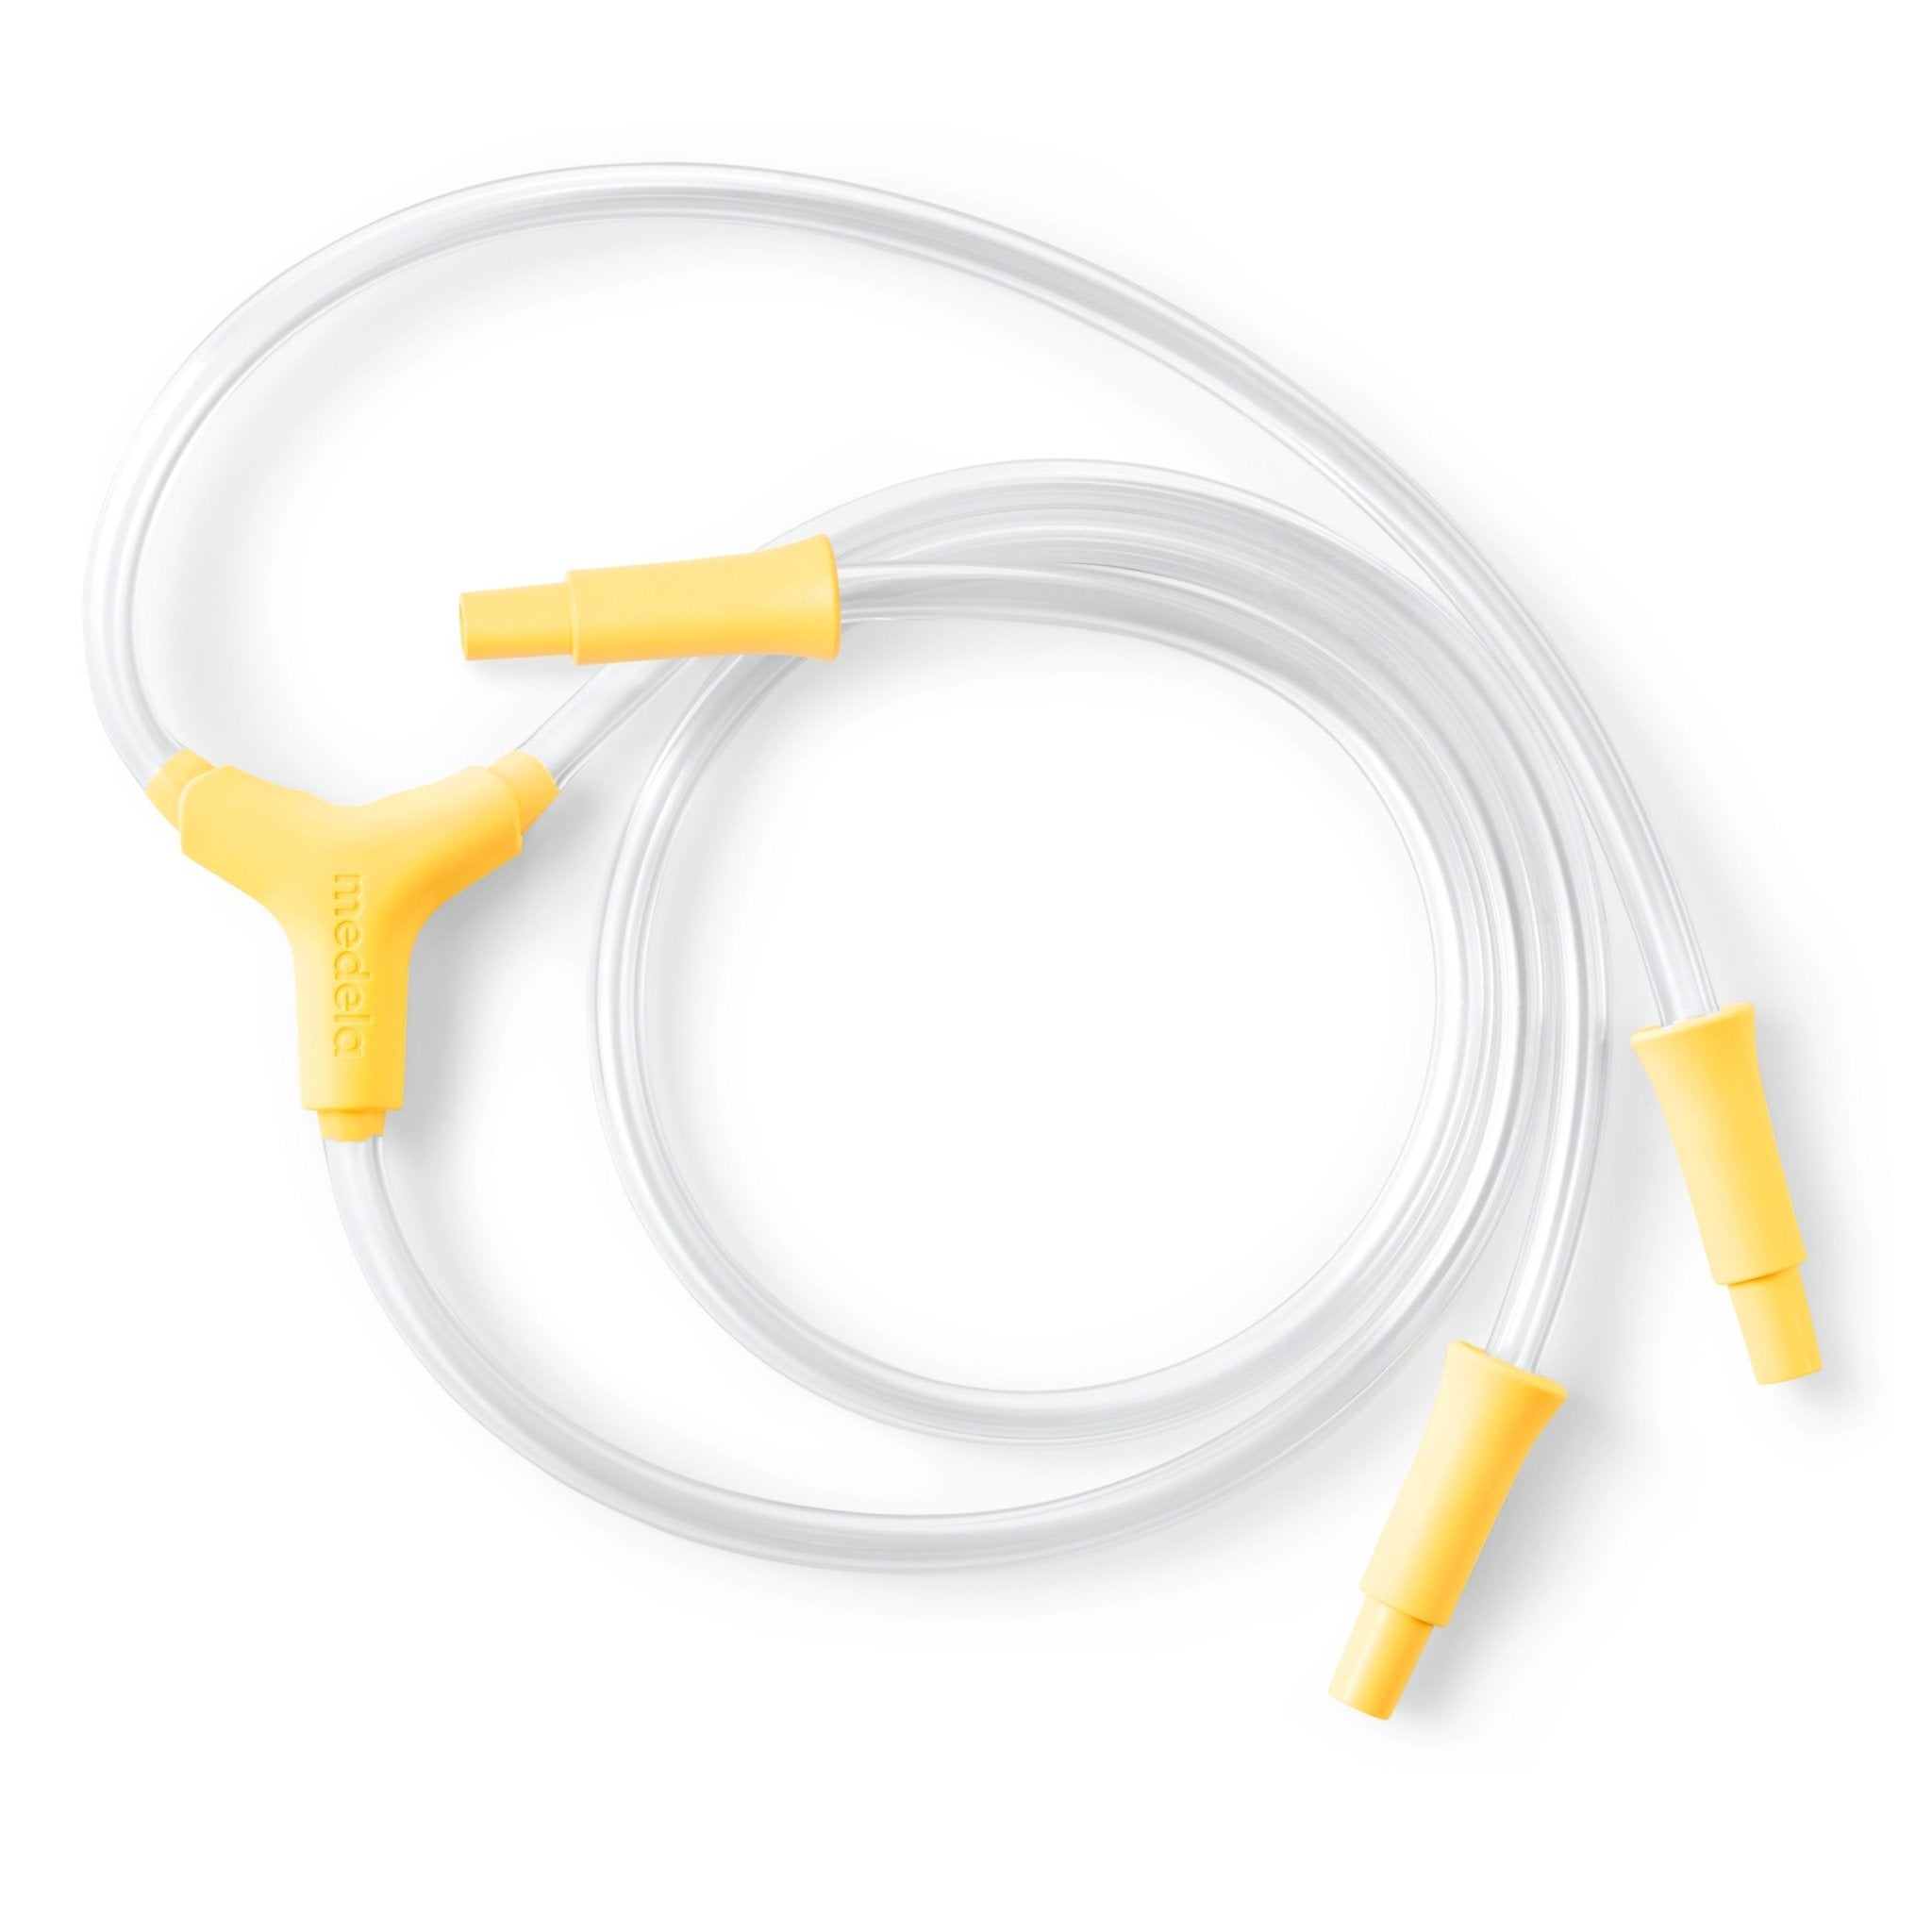 Medela Pump In Style Replacement Tubing - ANB Baby -breast pump replacement tubes